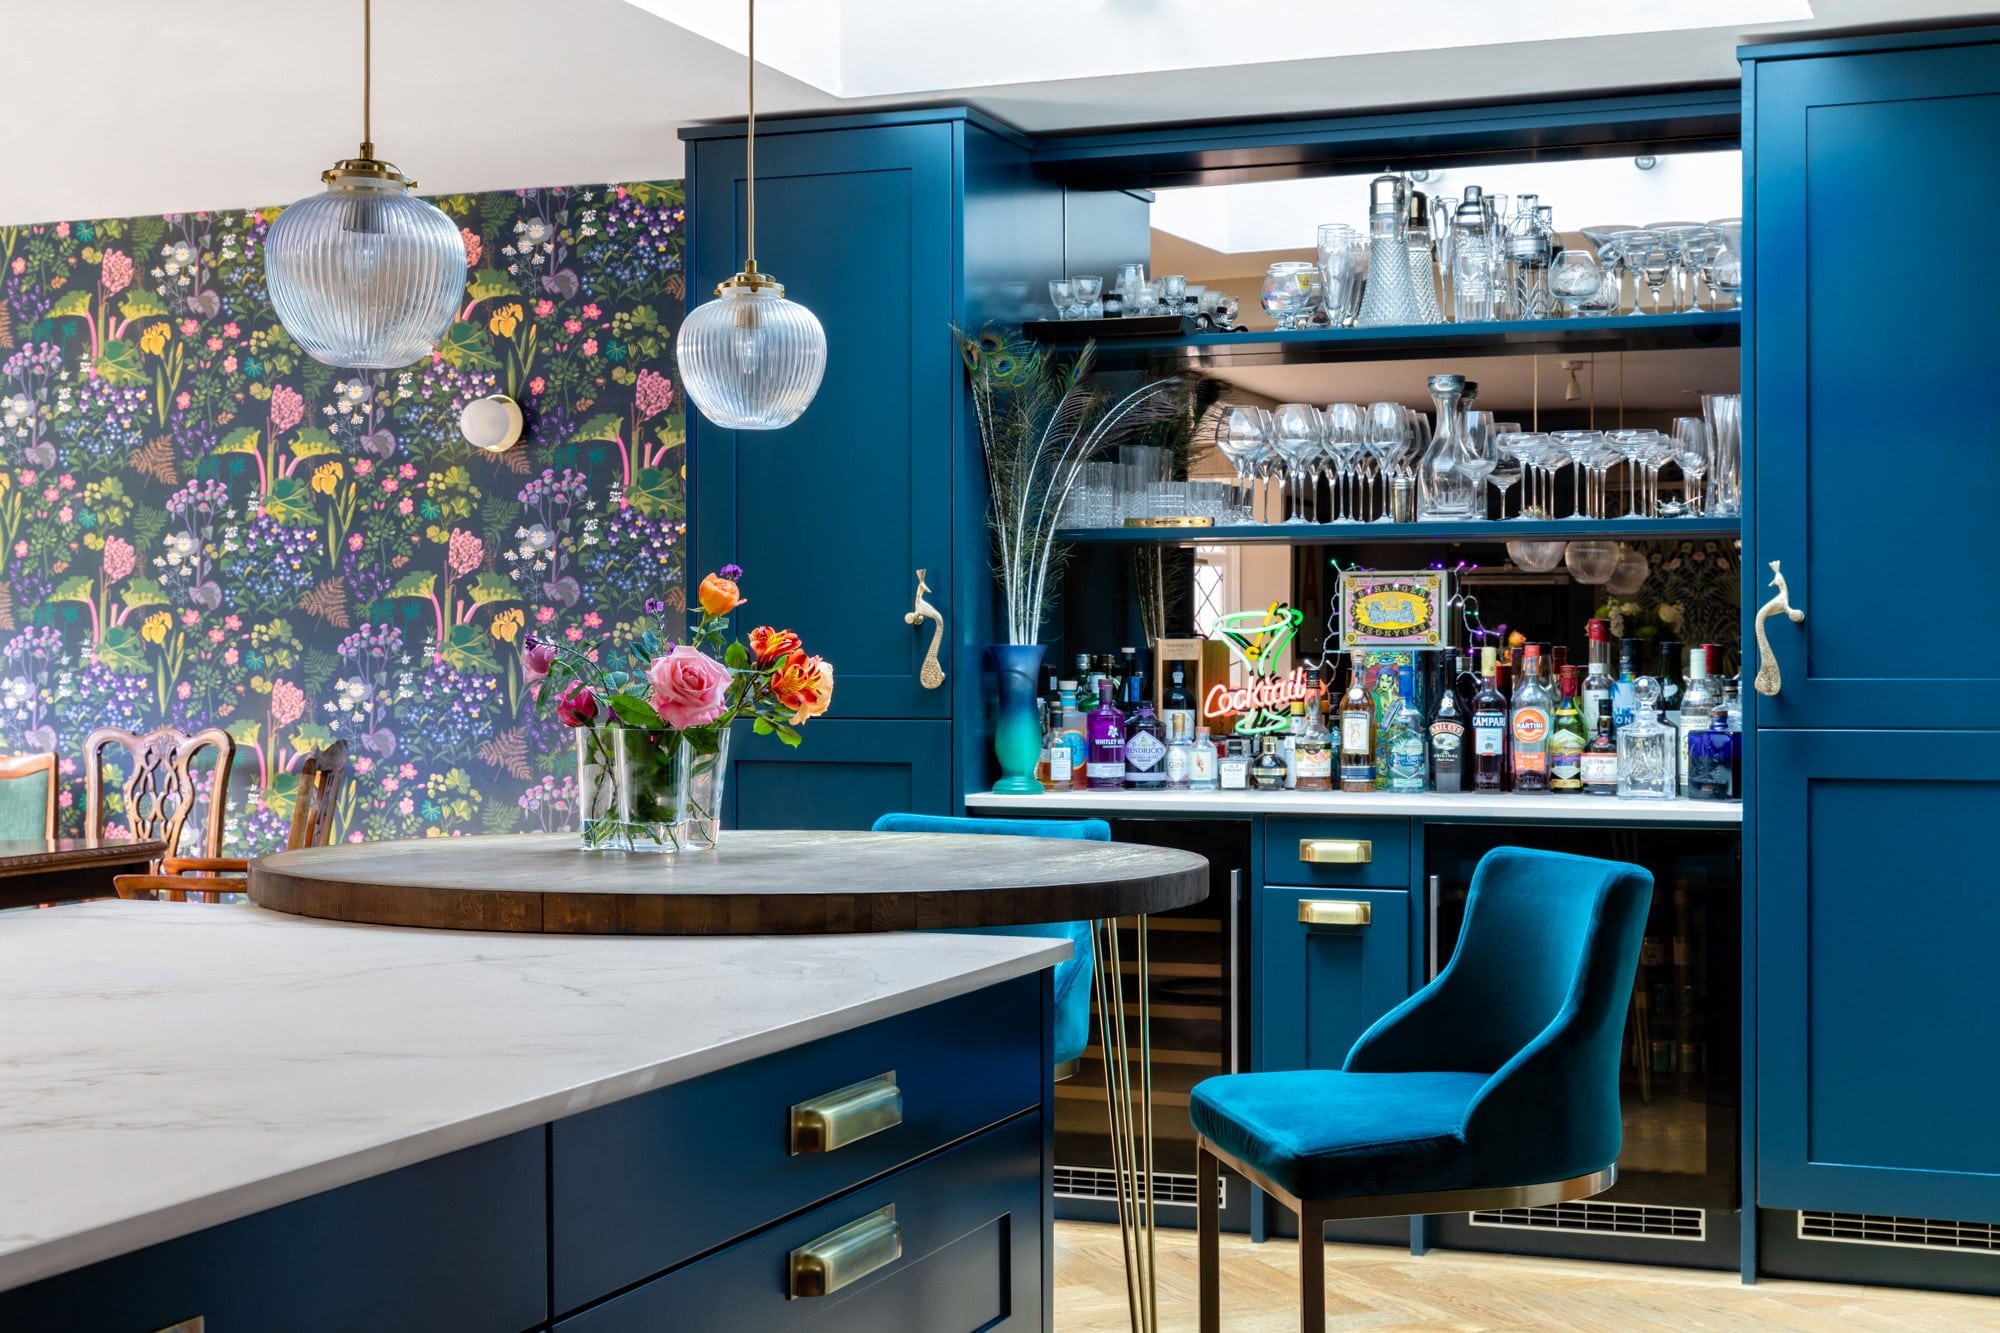 Vivid blue kitchen with open bar and hanging lights